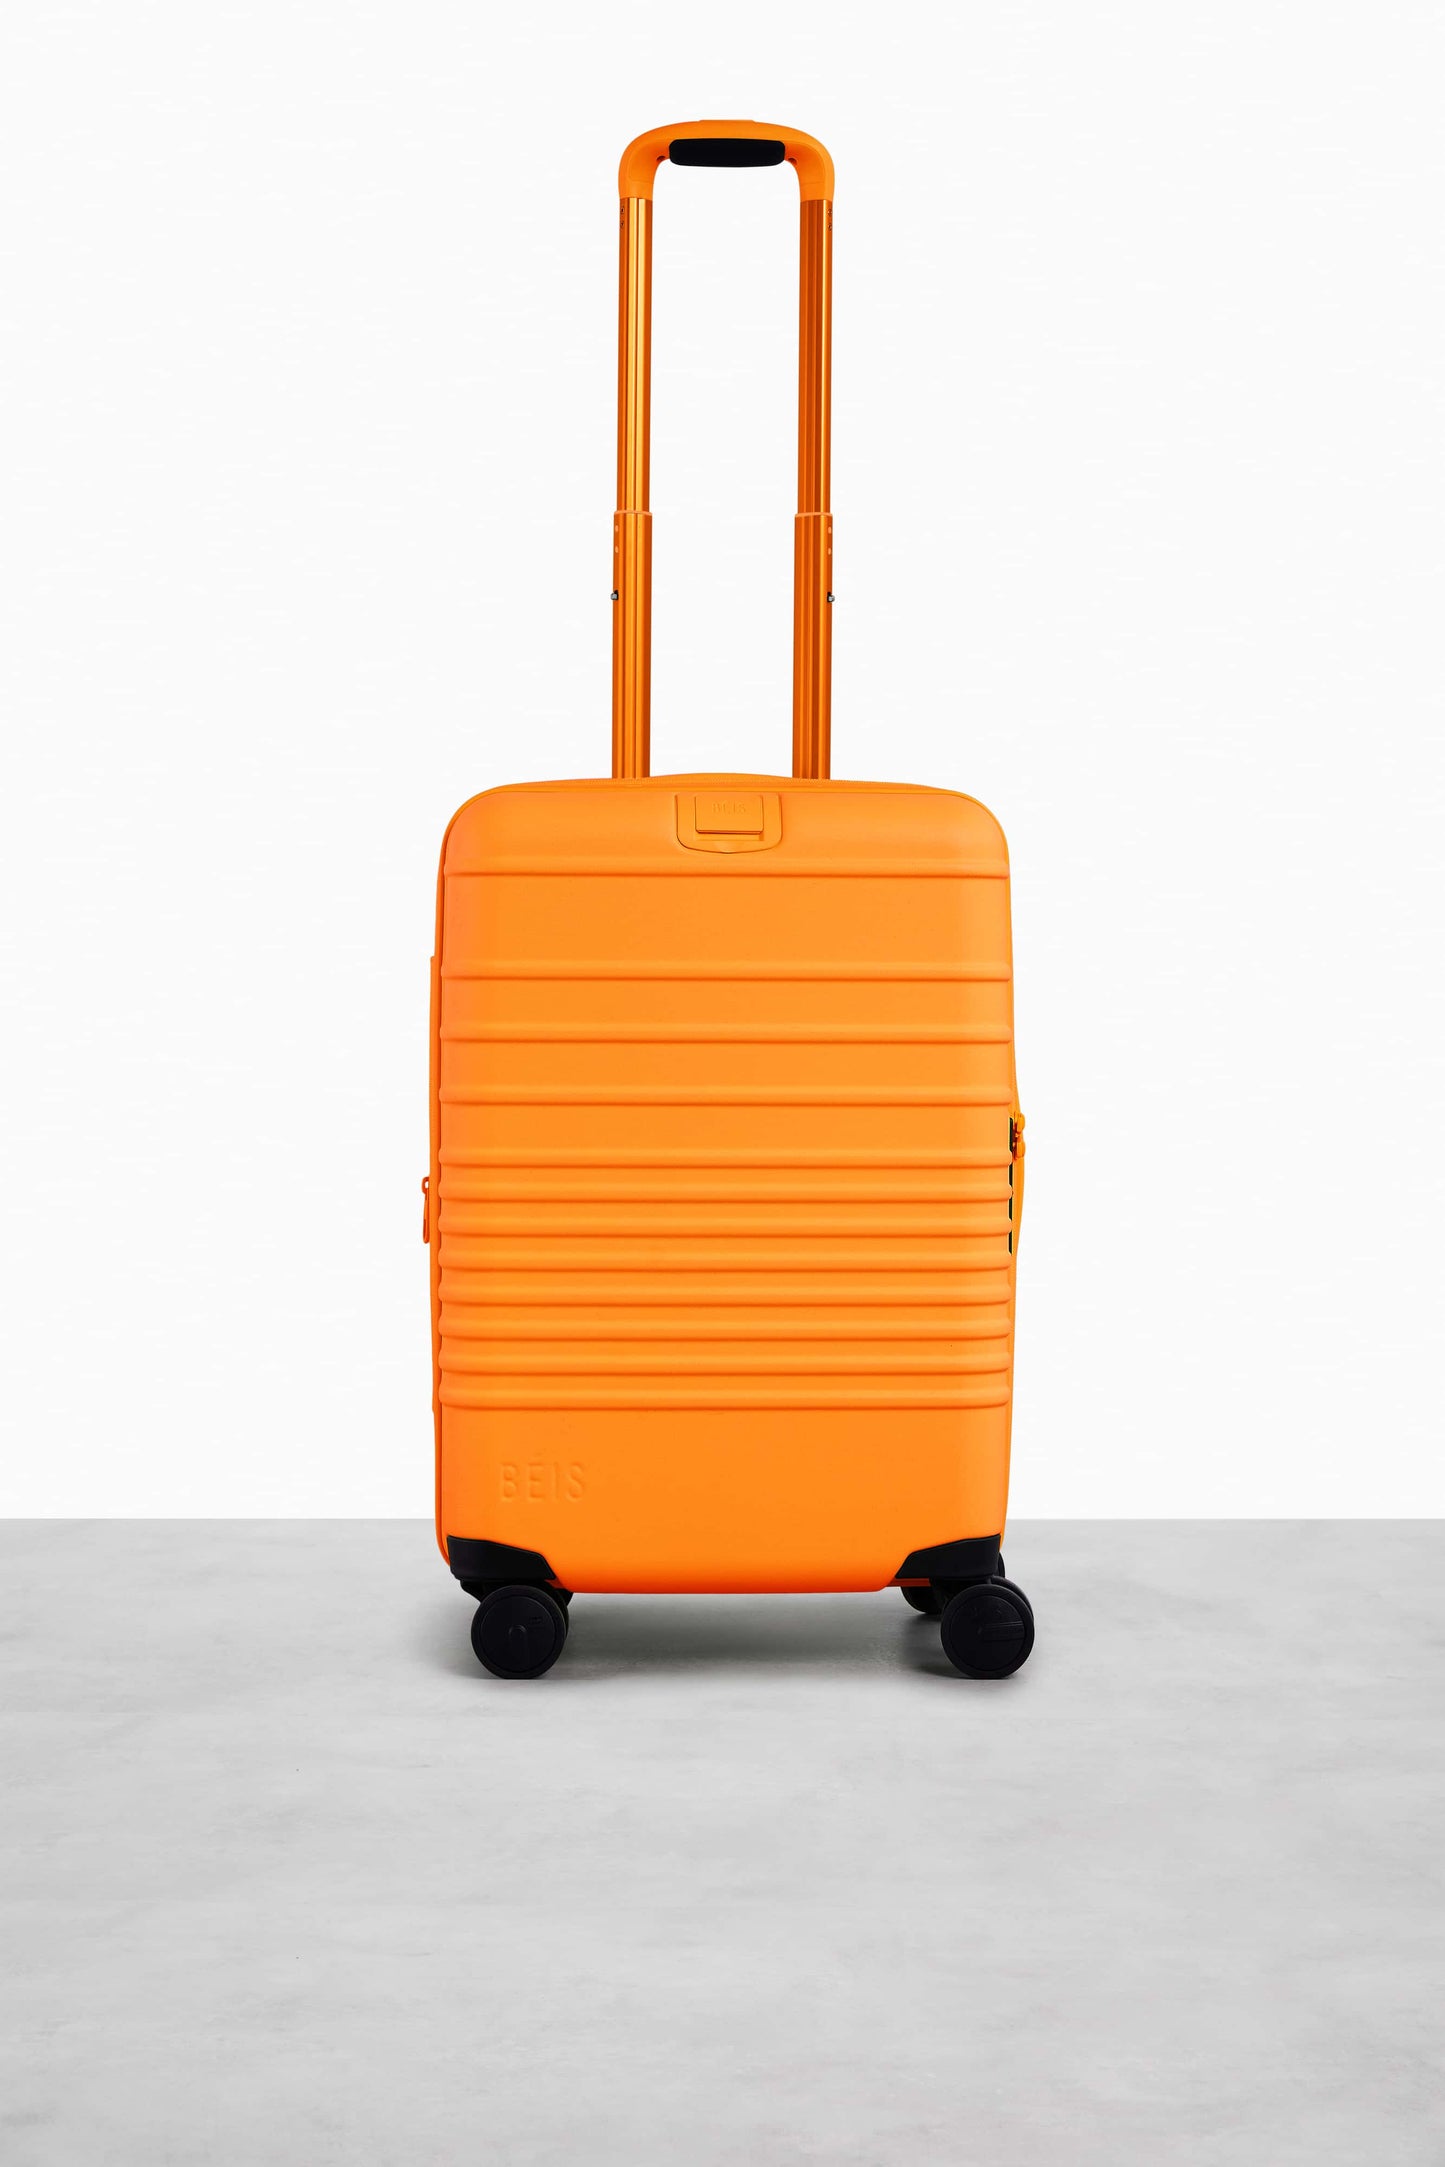 The Carry-On Roller in Creamsicle